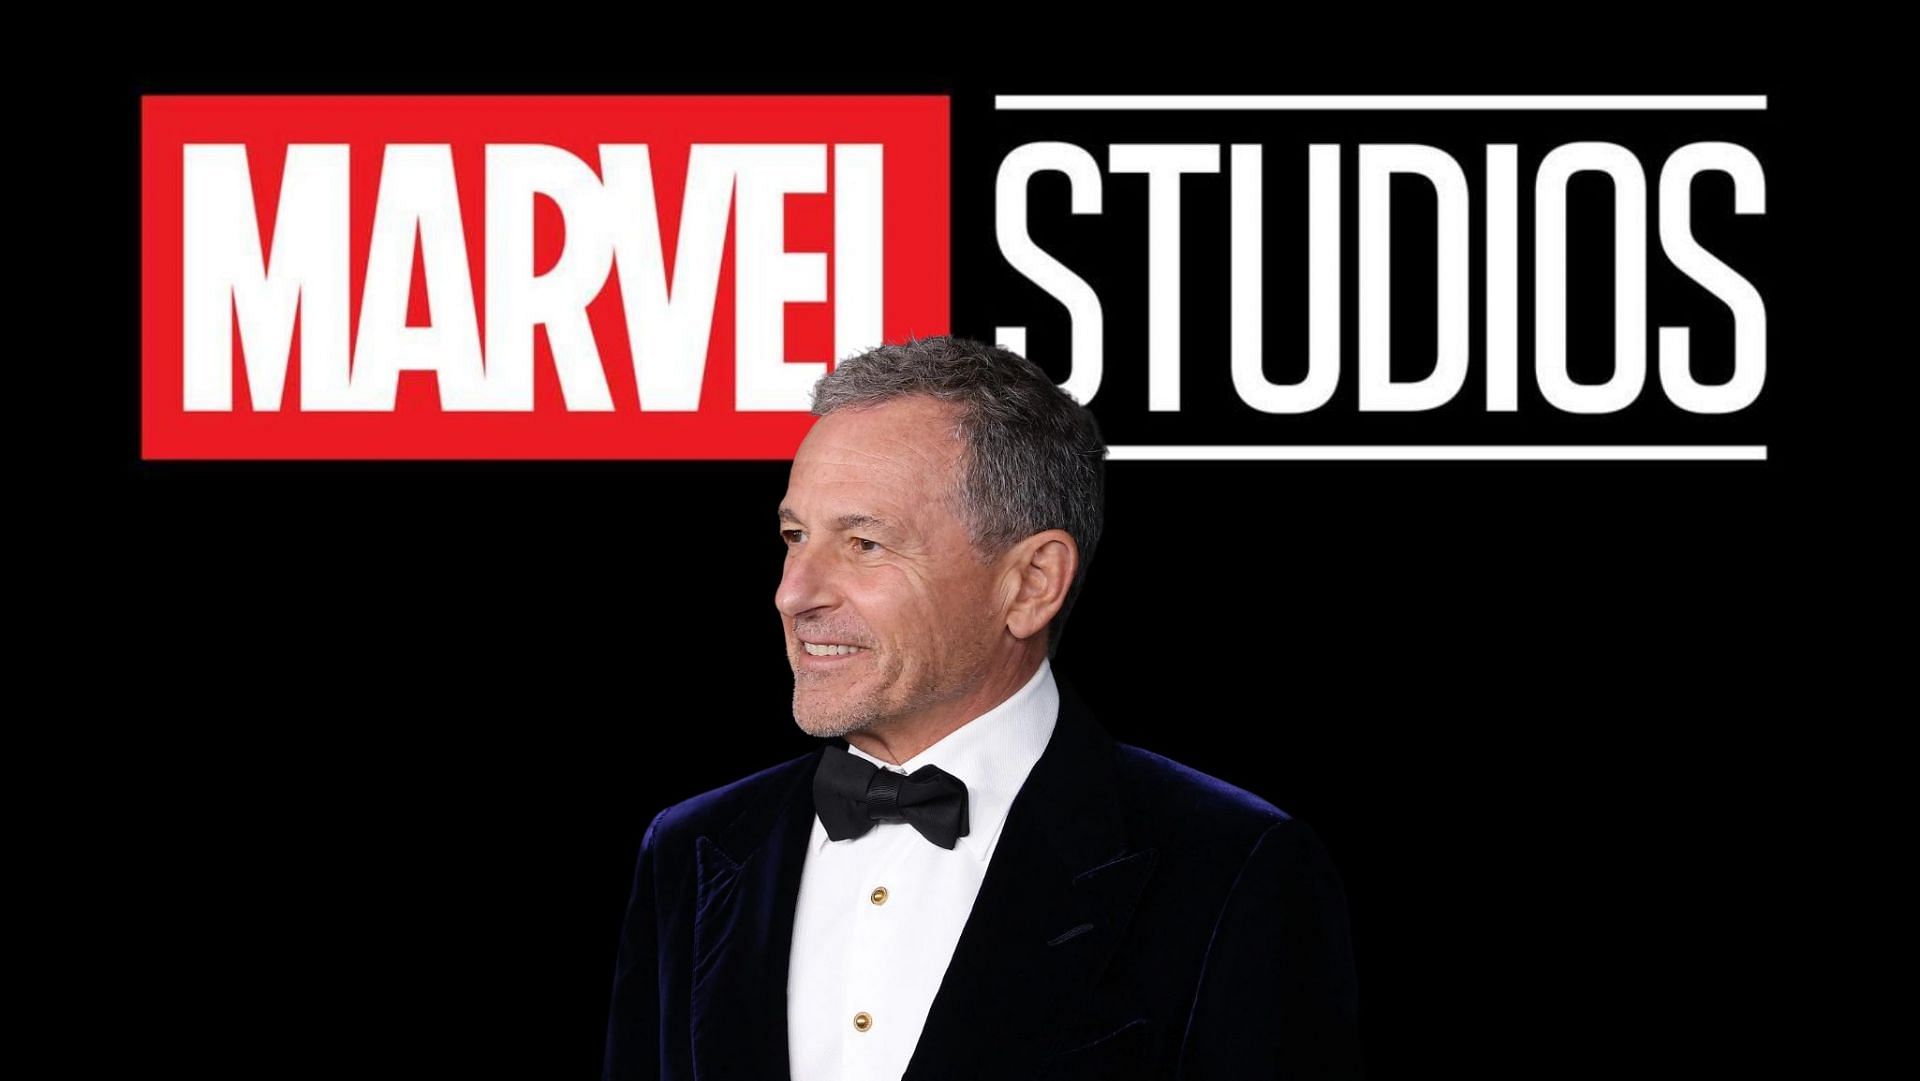 Disney CEO Bob Iger wants newness in Marvel movies: What